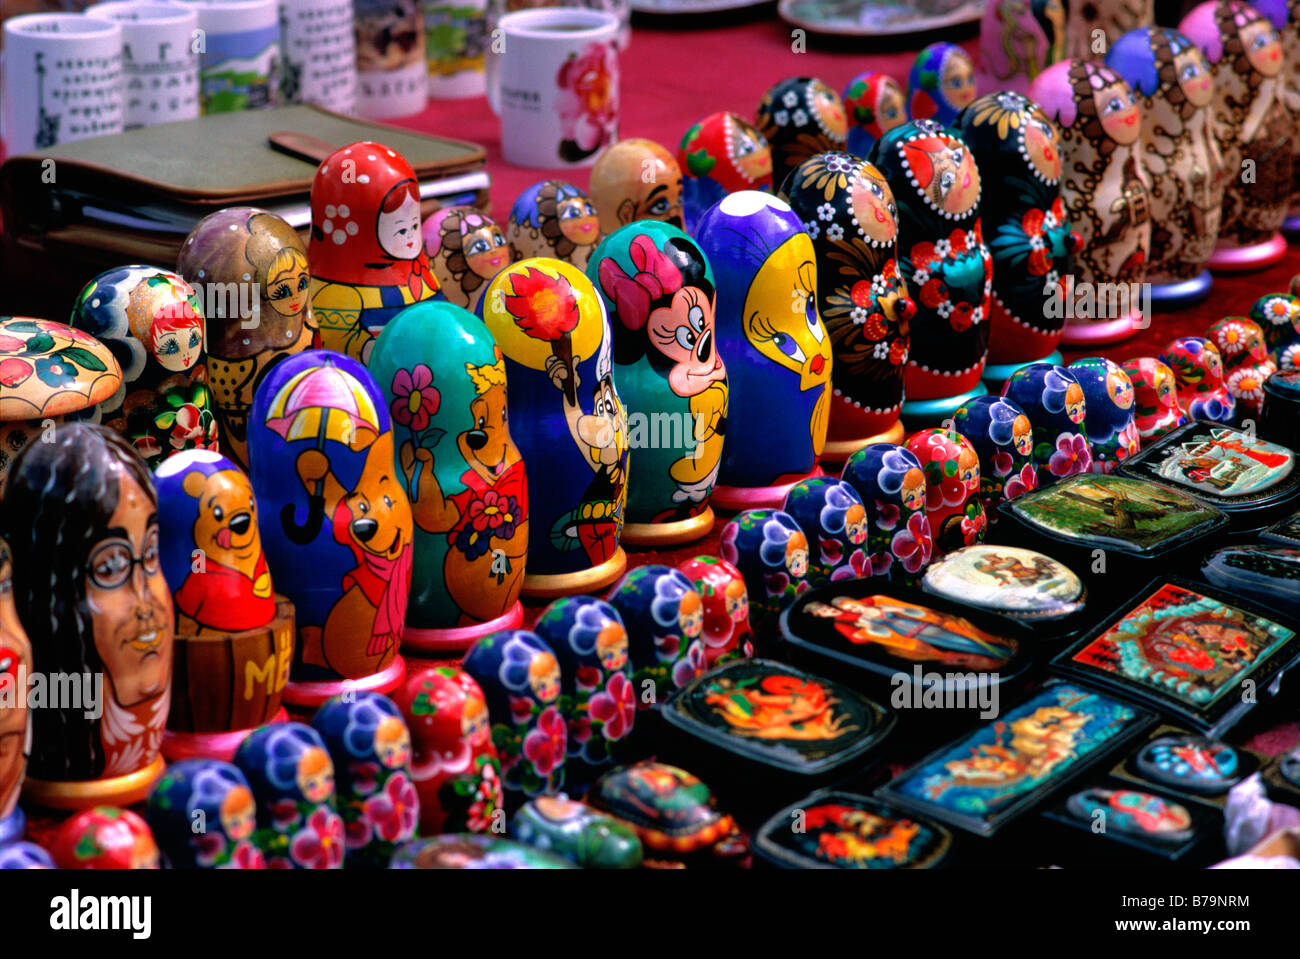 Matryoshka dolls also known as Russian nested doll on sale at a flea market near Alexander Nevsky Cathedral in Sofia, Bulgaria. Stock Photo